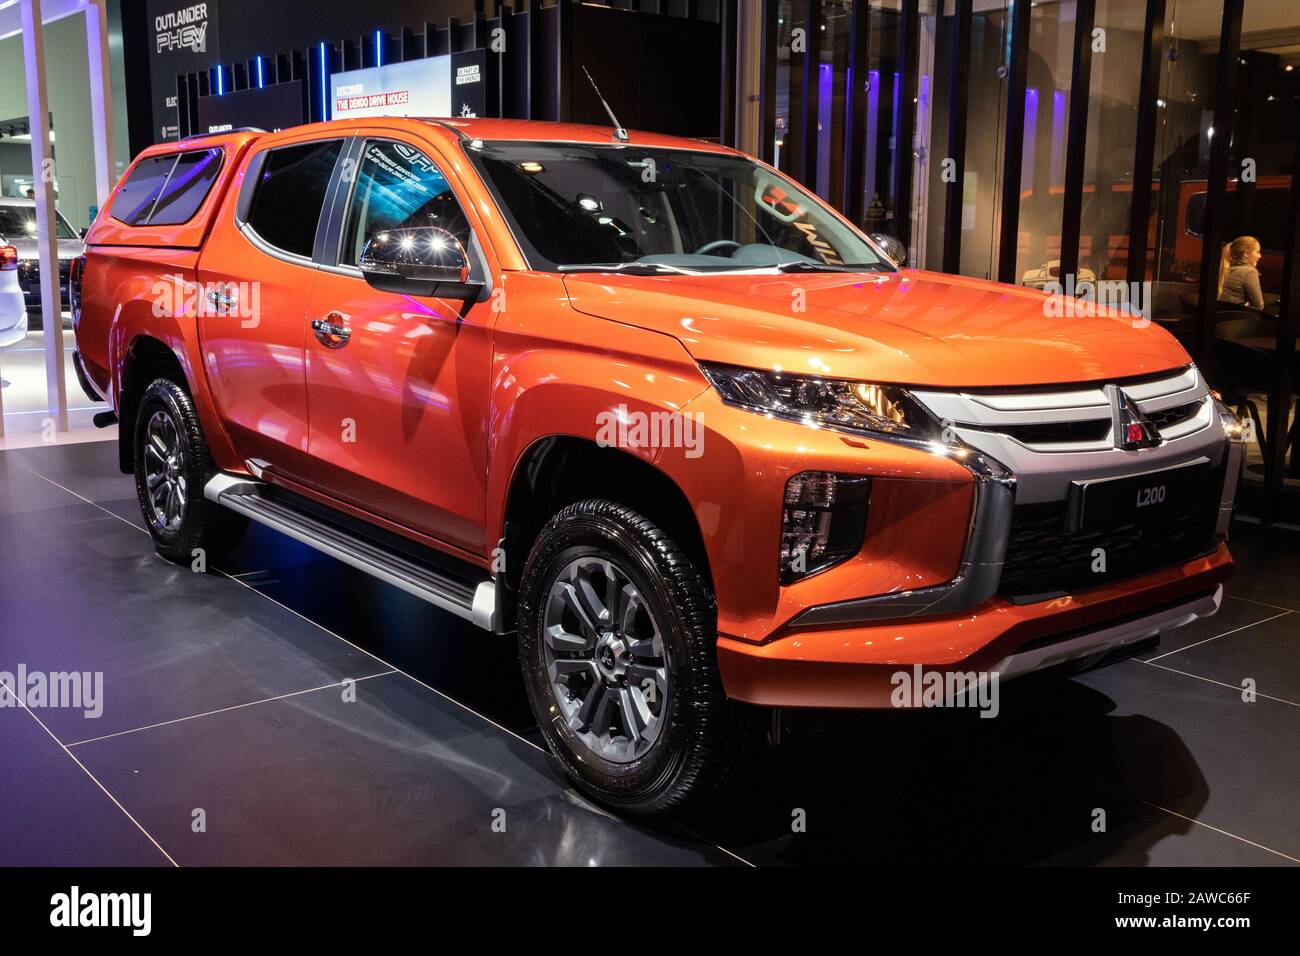 BRUSSELS - JAN 9, 2020: New Mitsubishi L200 pickup truck model showcased at the Brussels Autosalon 2020 Motor Show. Stock Photo